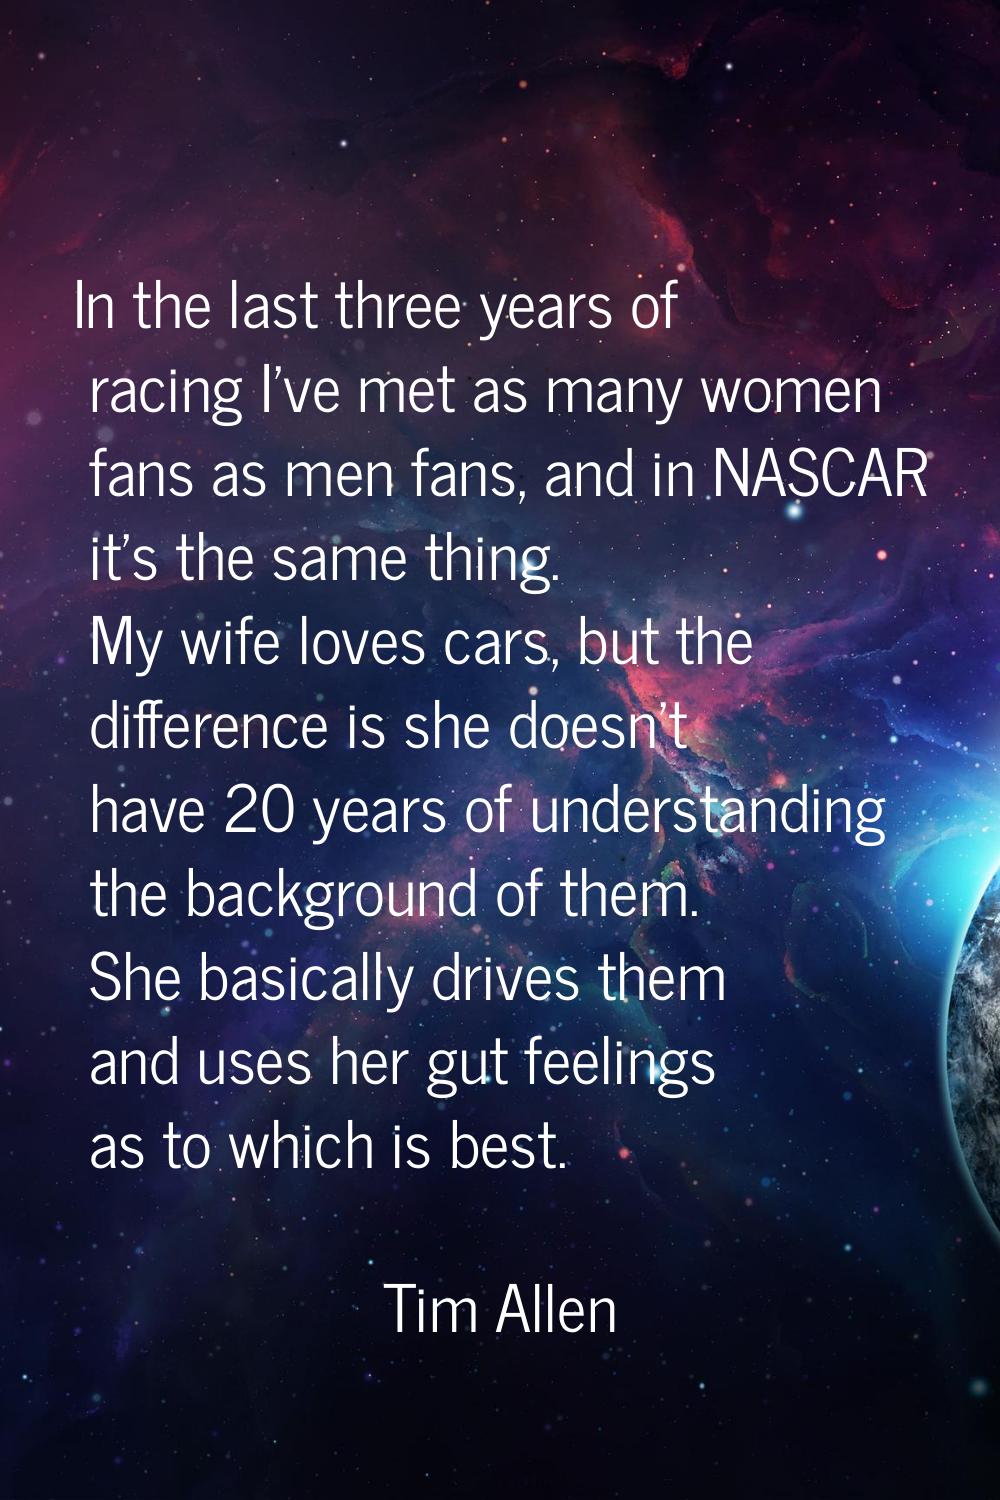 In the last three years of racing I've met as many women fans as men fans, and in NASCAR it's the s